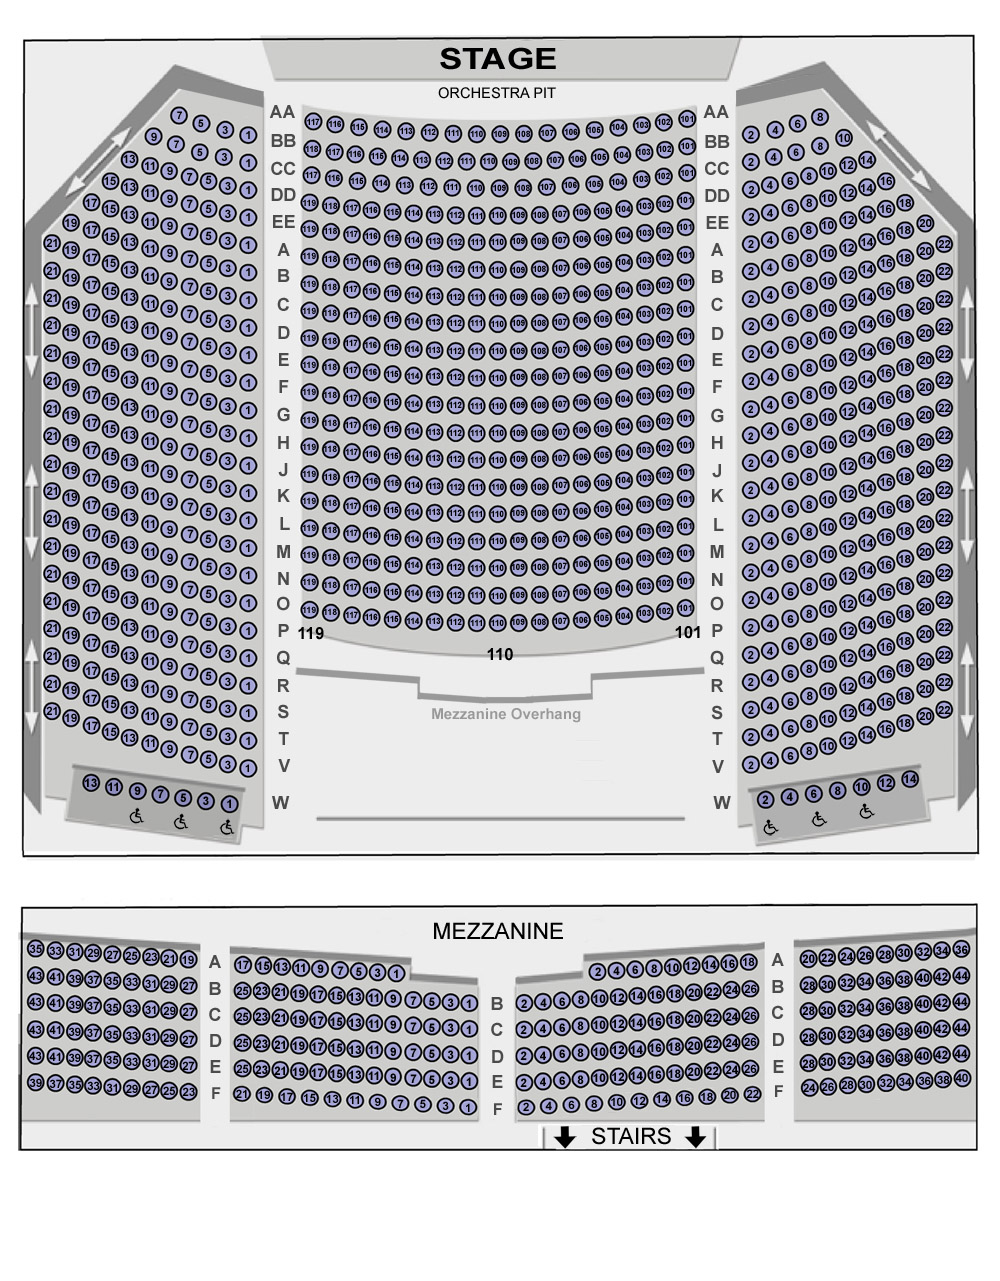 Westport Country Playhouse Seating Chart